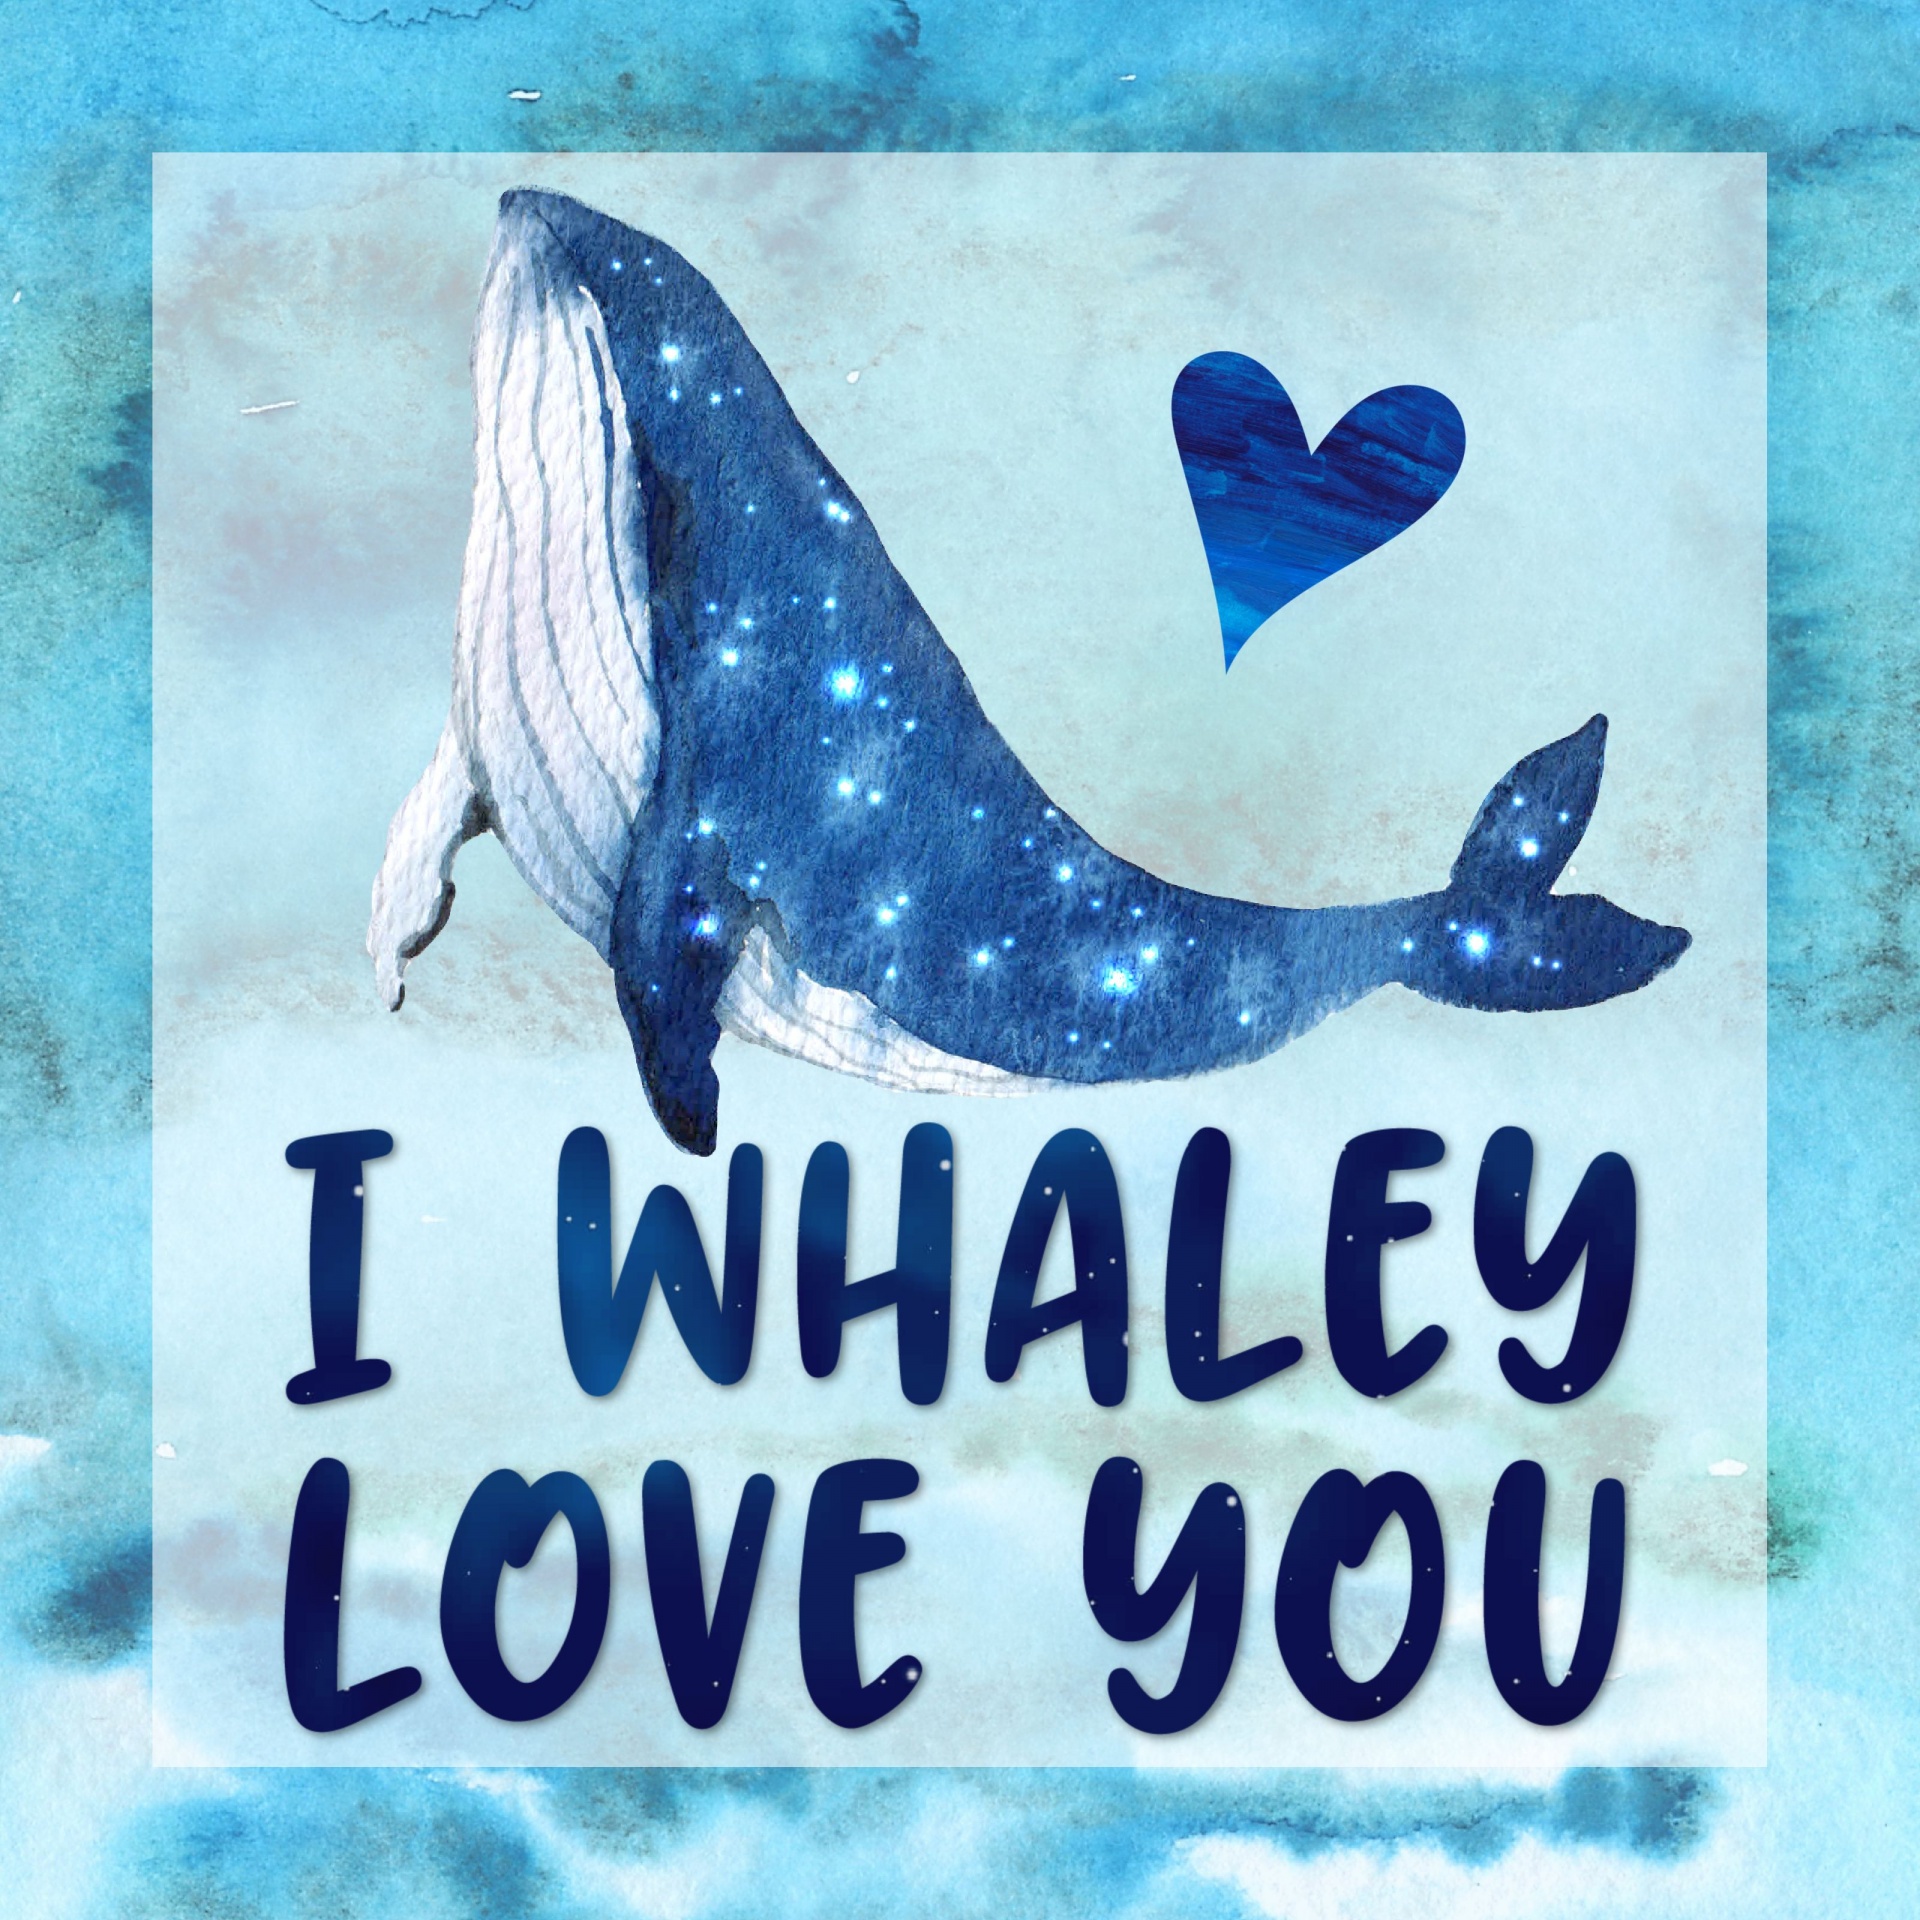 I whaley love you whale illustration for Valentine's Day